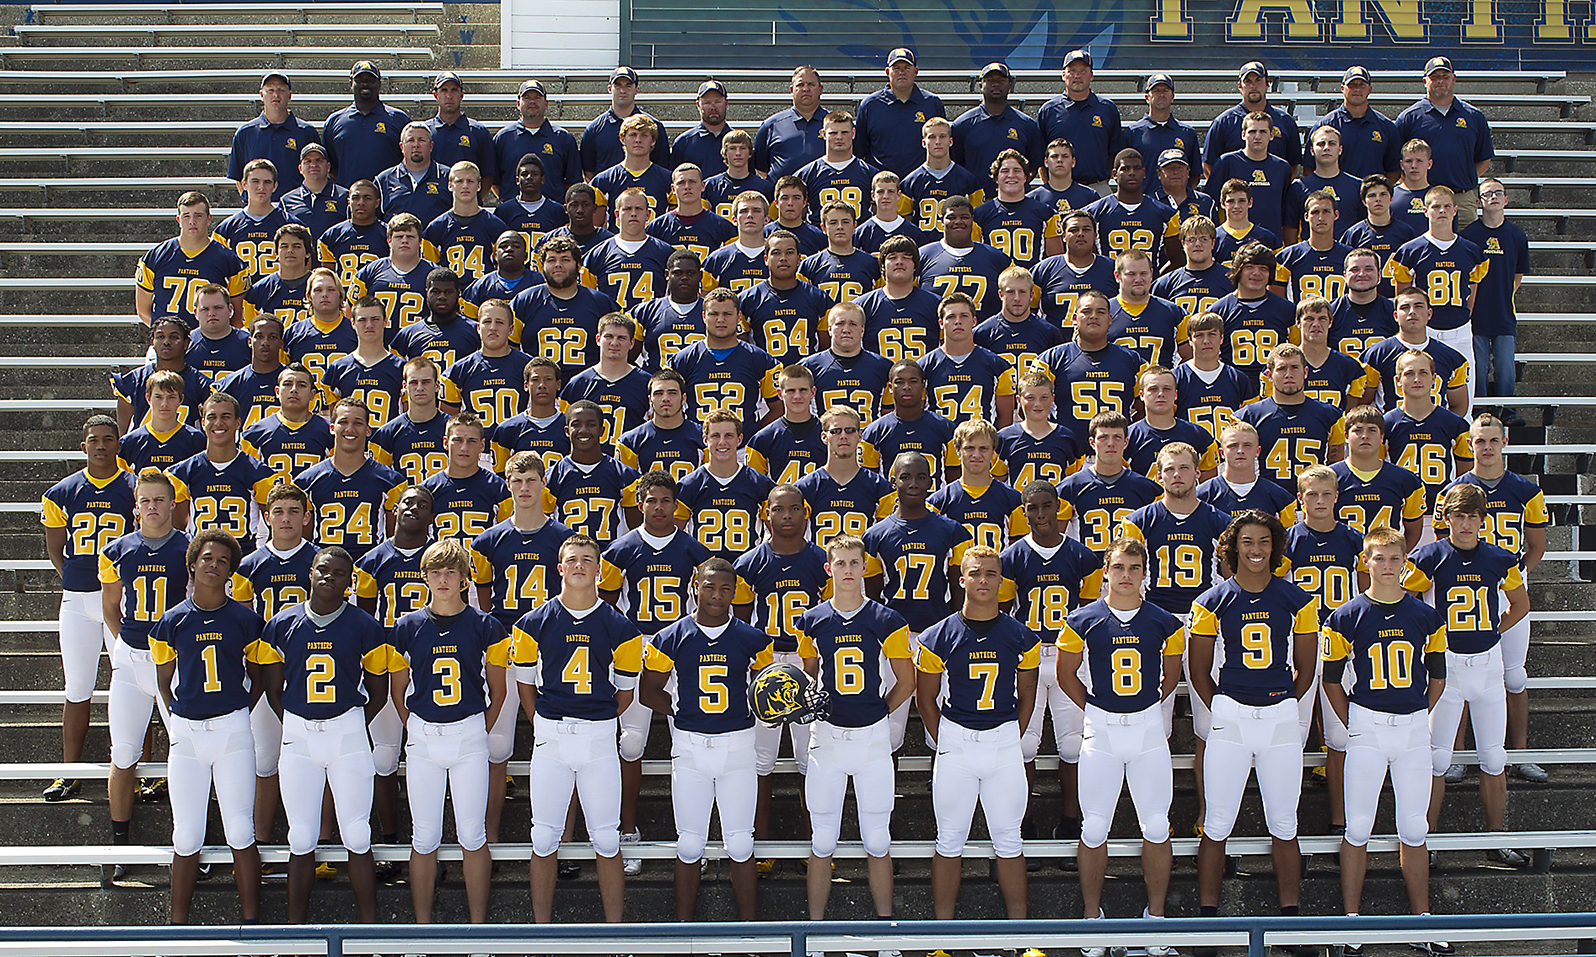 Whitmer Panthers - The Blade1596 x 957